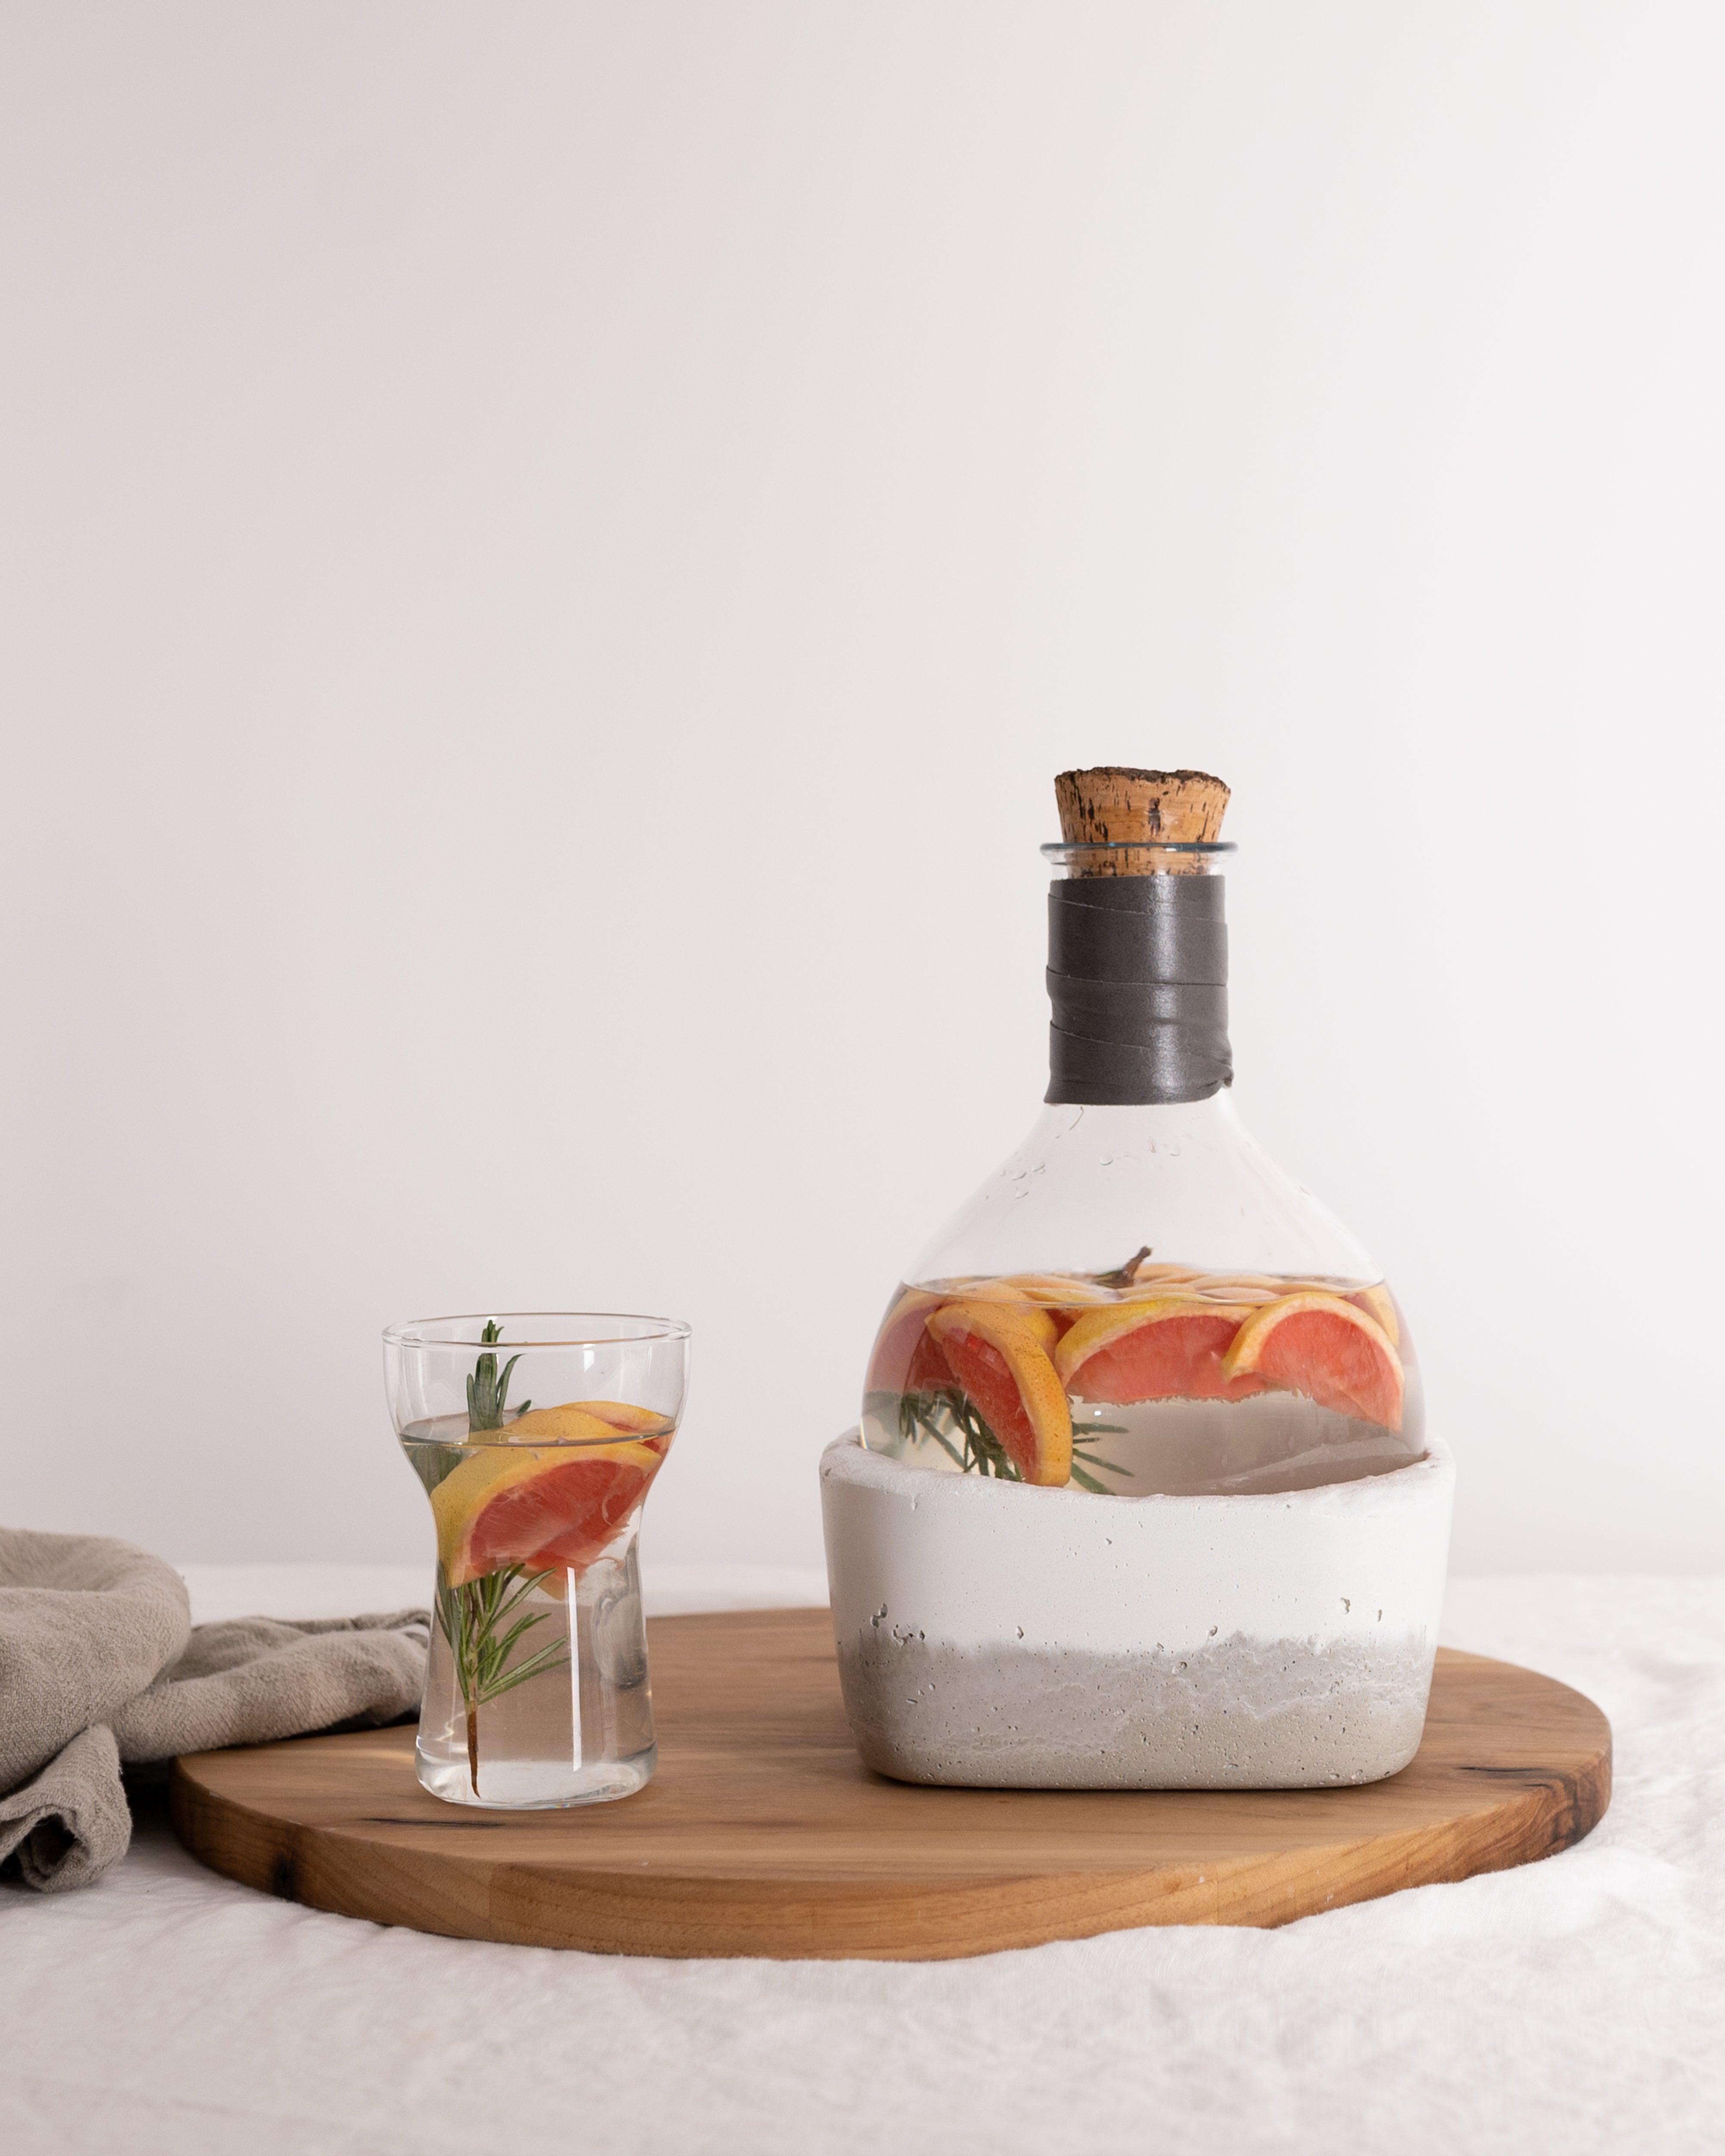 Rock Bottom 2.0 concrete wine decanter with water infused with grapefruit wedges and rosemary sprigs by Studio50